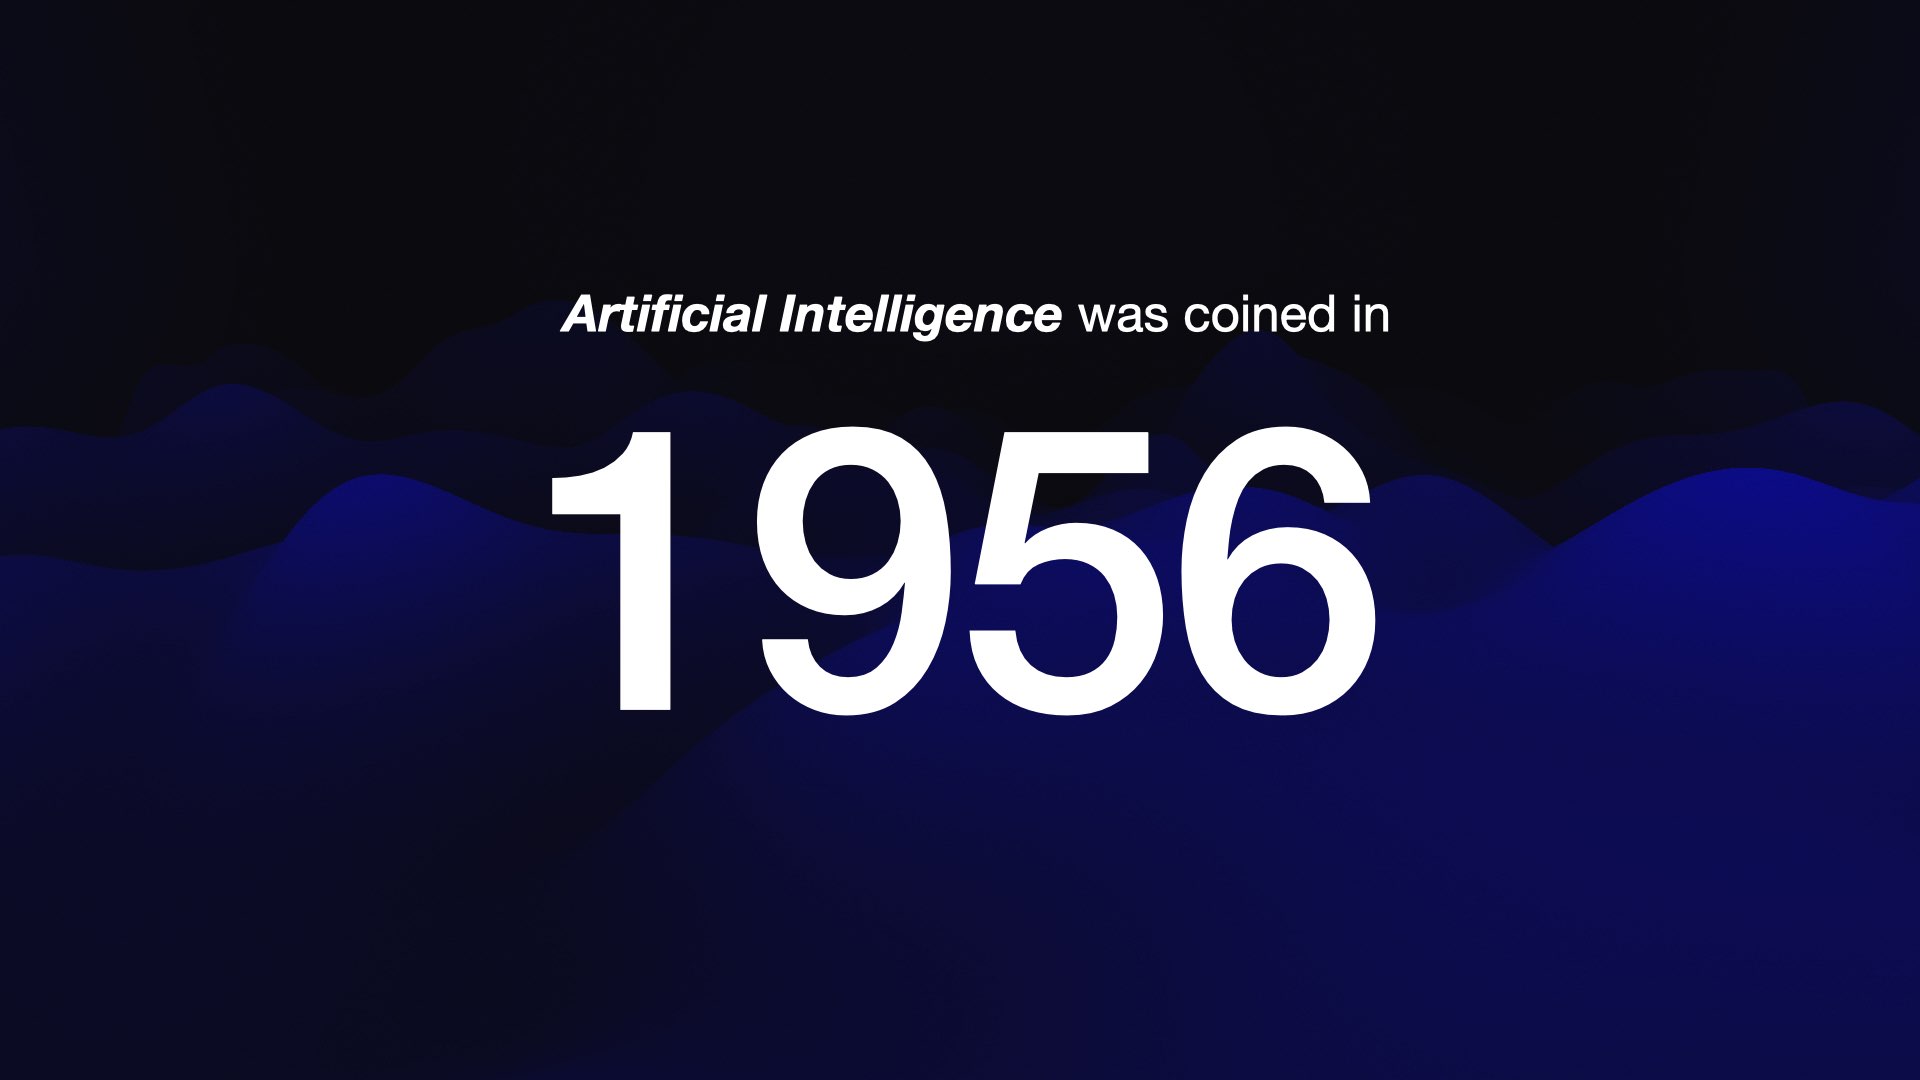 Artificial Intelligence was coined in 1956 